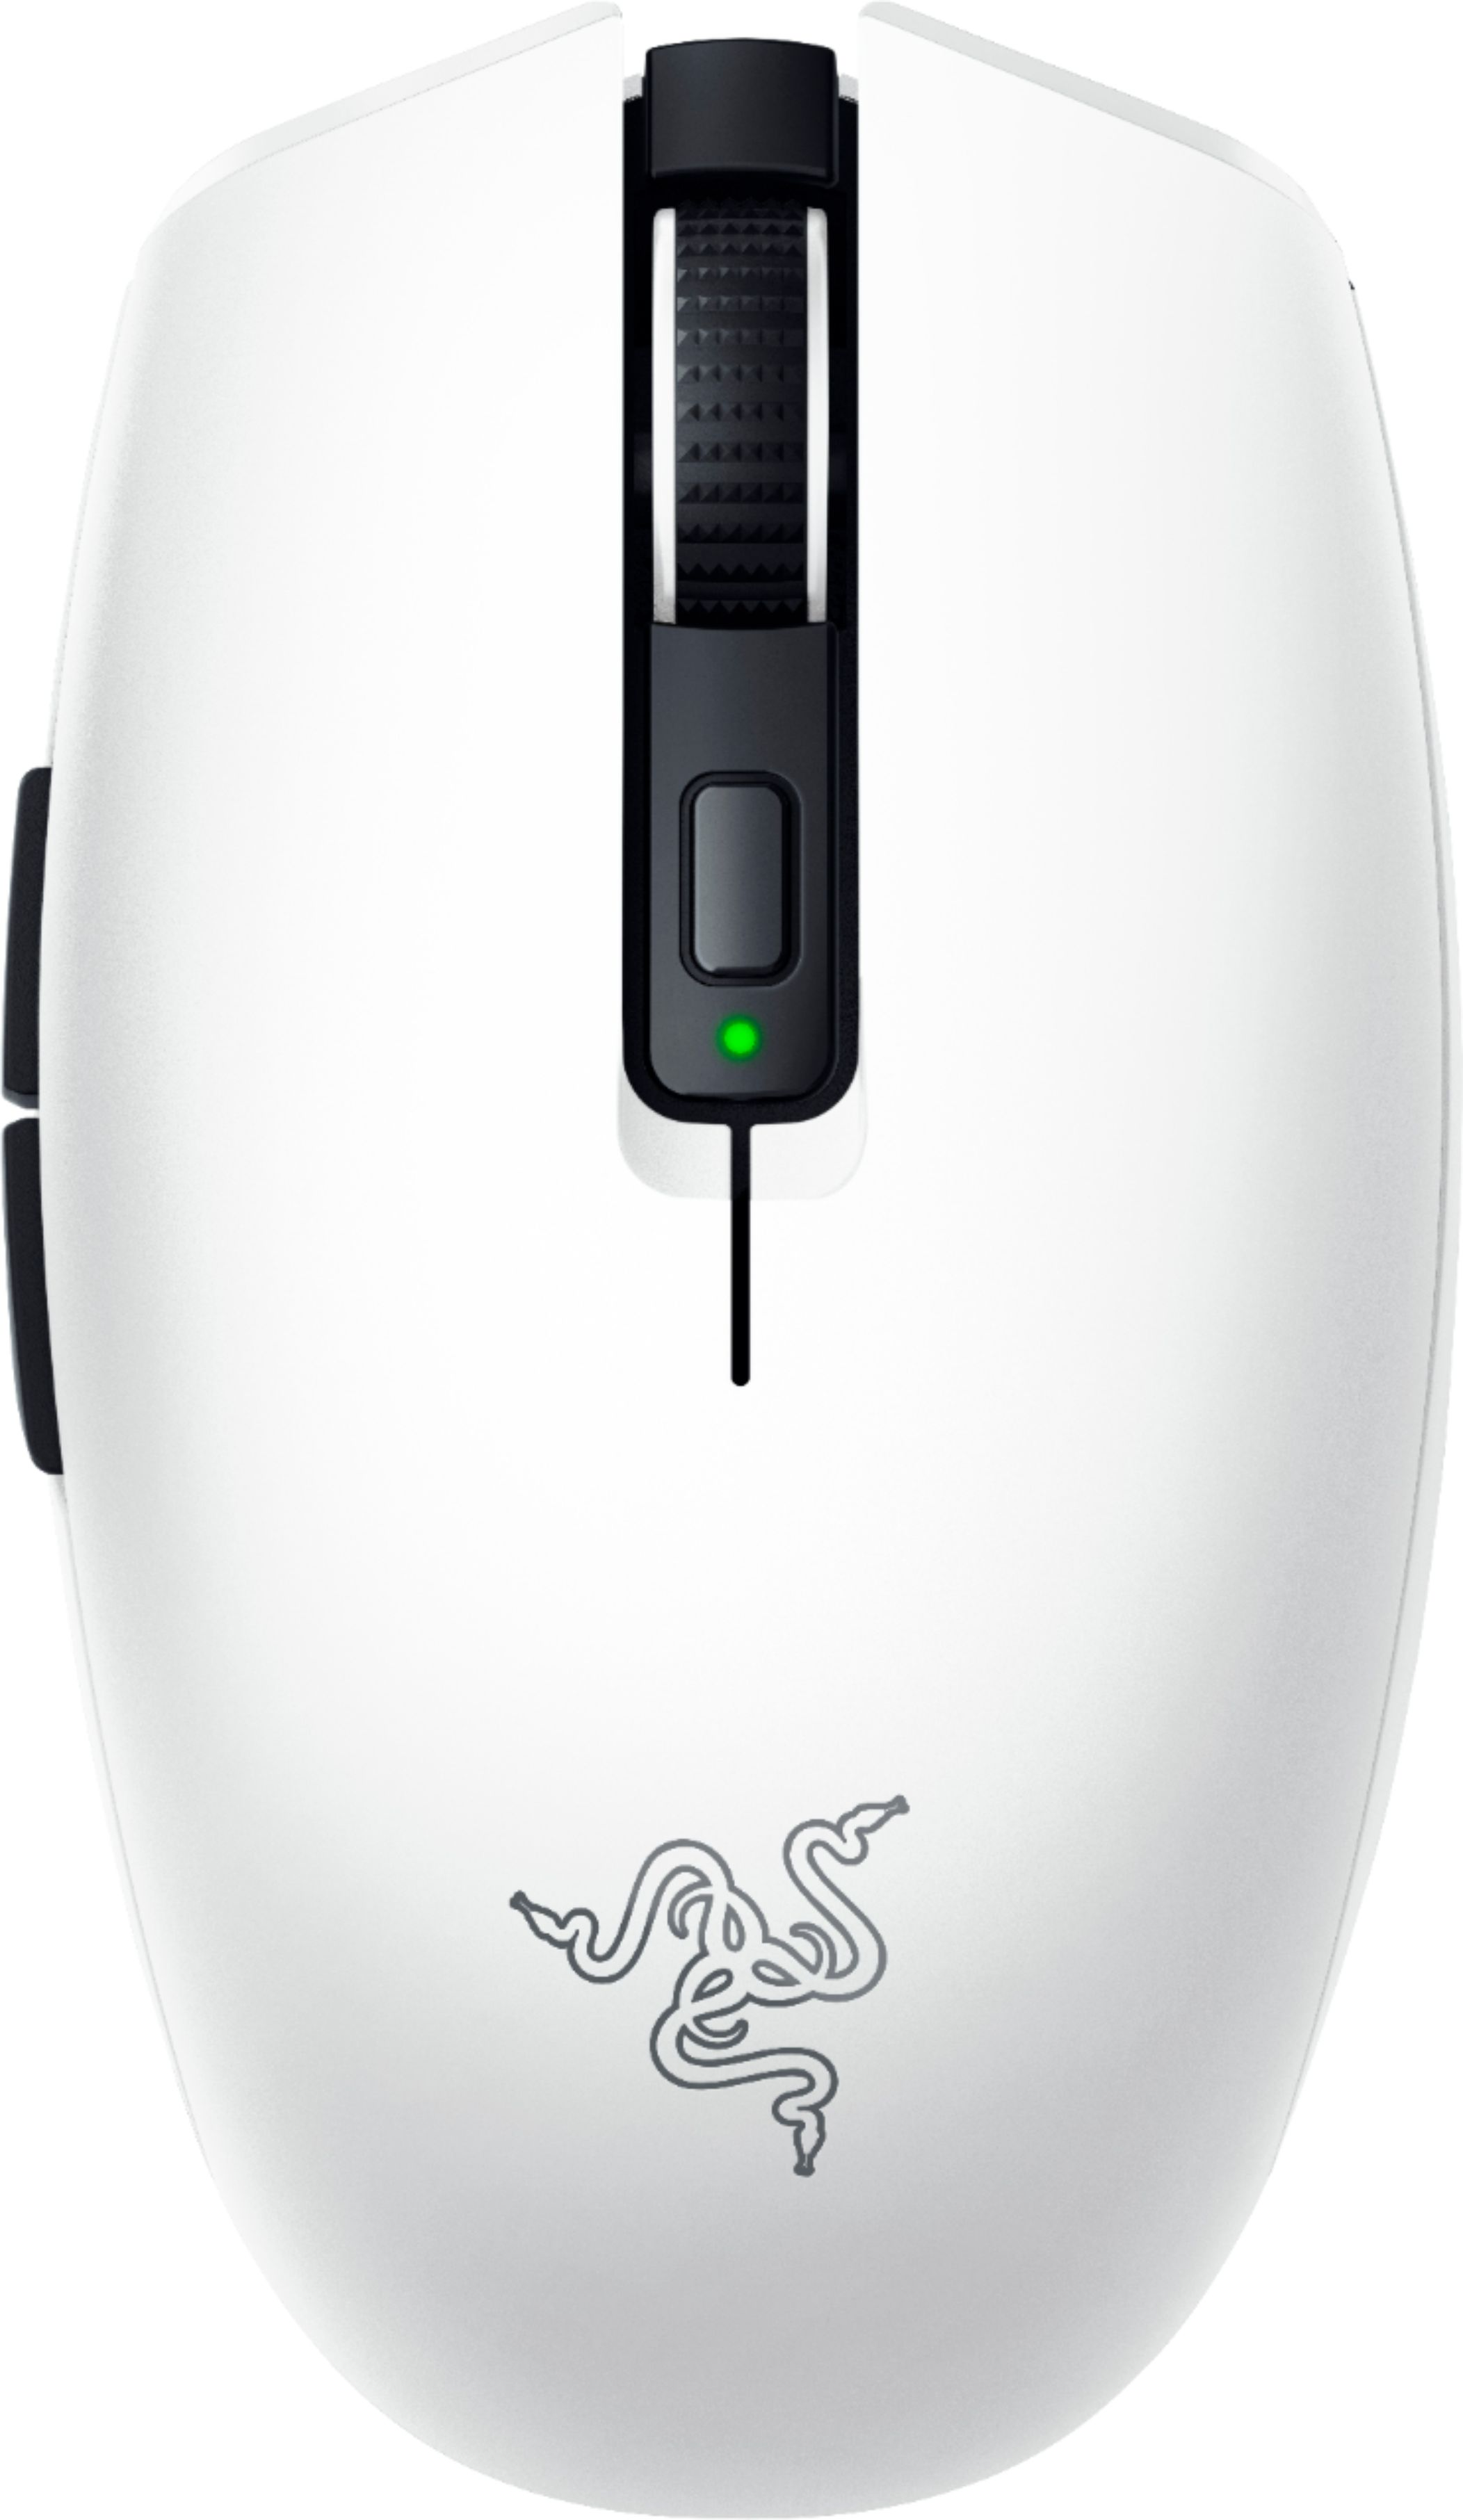 Razer Orochi V2 Lightweight Wireless Optical Gaming Mouse With 950 Hour Battery Life White RZ01-03730400-R3U1 - Best Buy $35